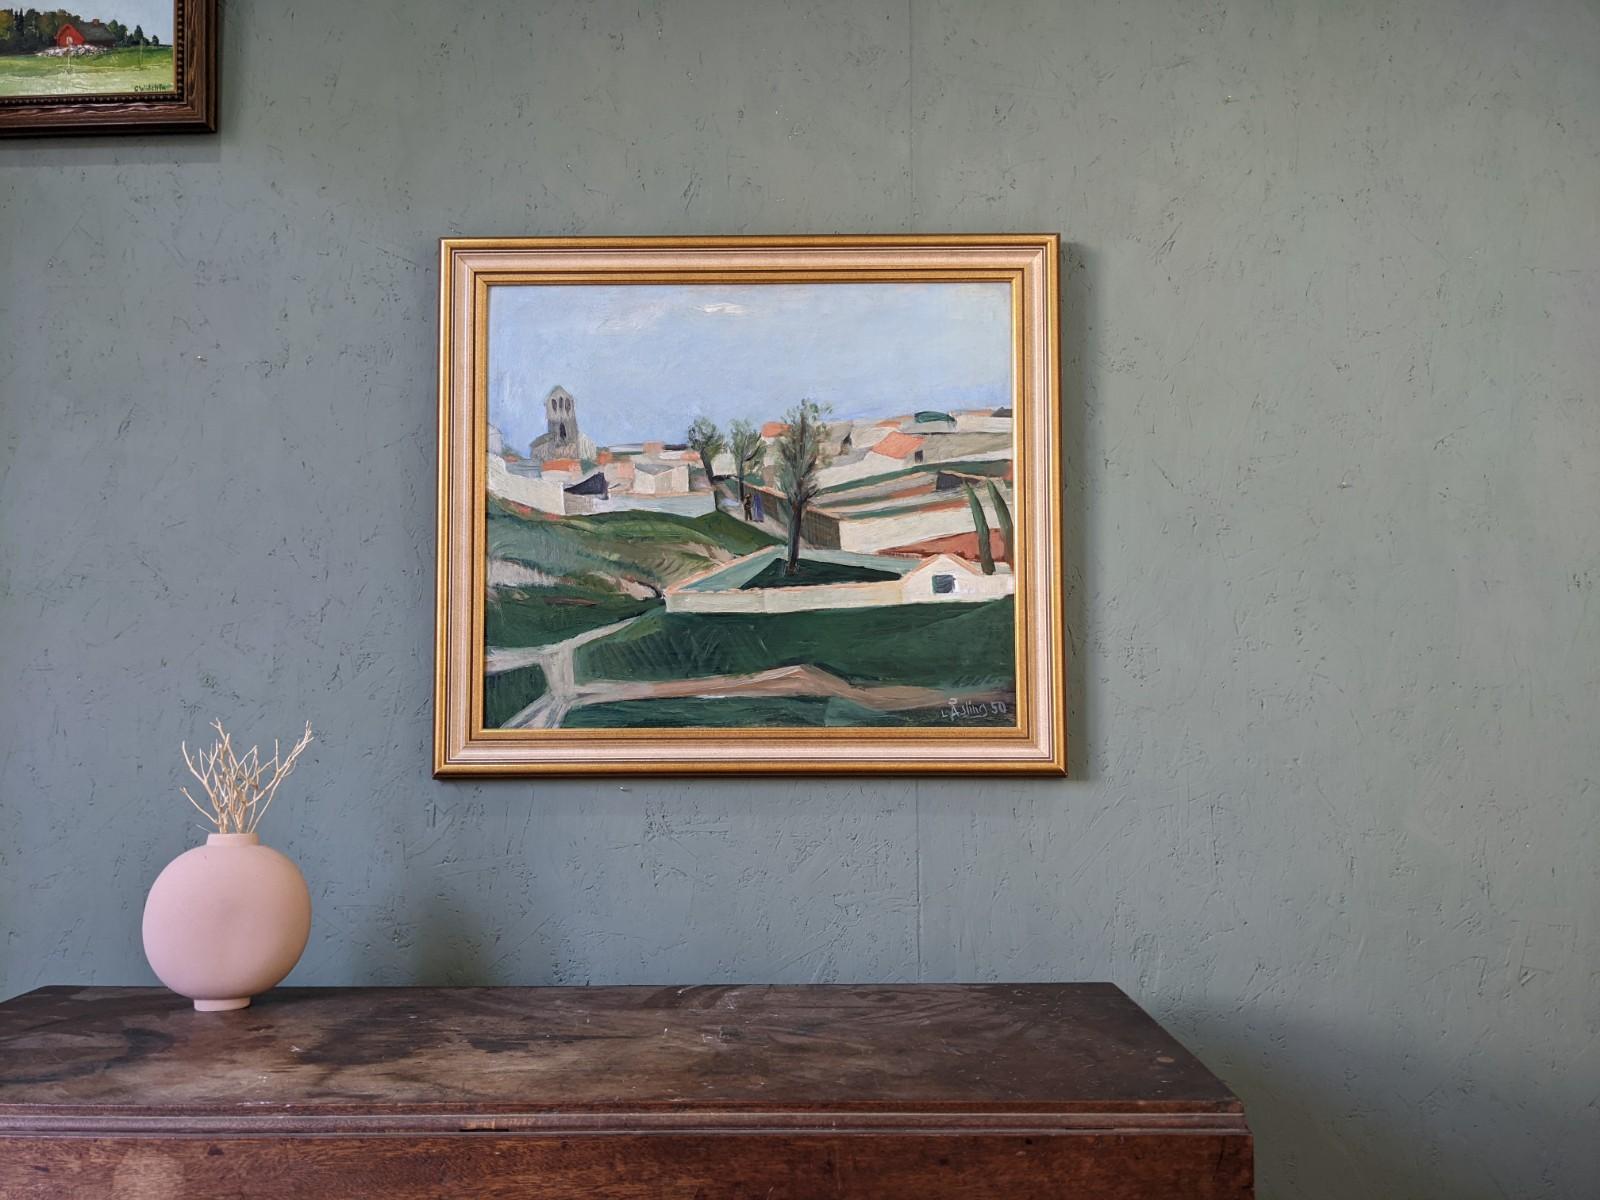 SLOPE
Size: 63 x 73 cm (including frame)
Oil on board

A very pleasant and soothing modernist style landscape painting, executed in oil onto board and dated 1950.

In this scenic and atmospheric sloping landscape composition that is filled with